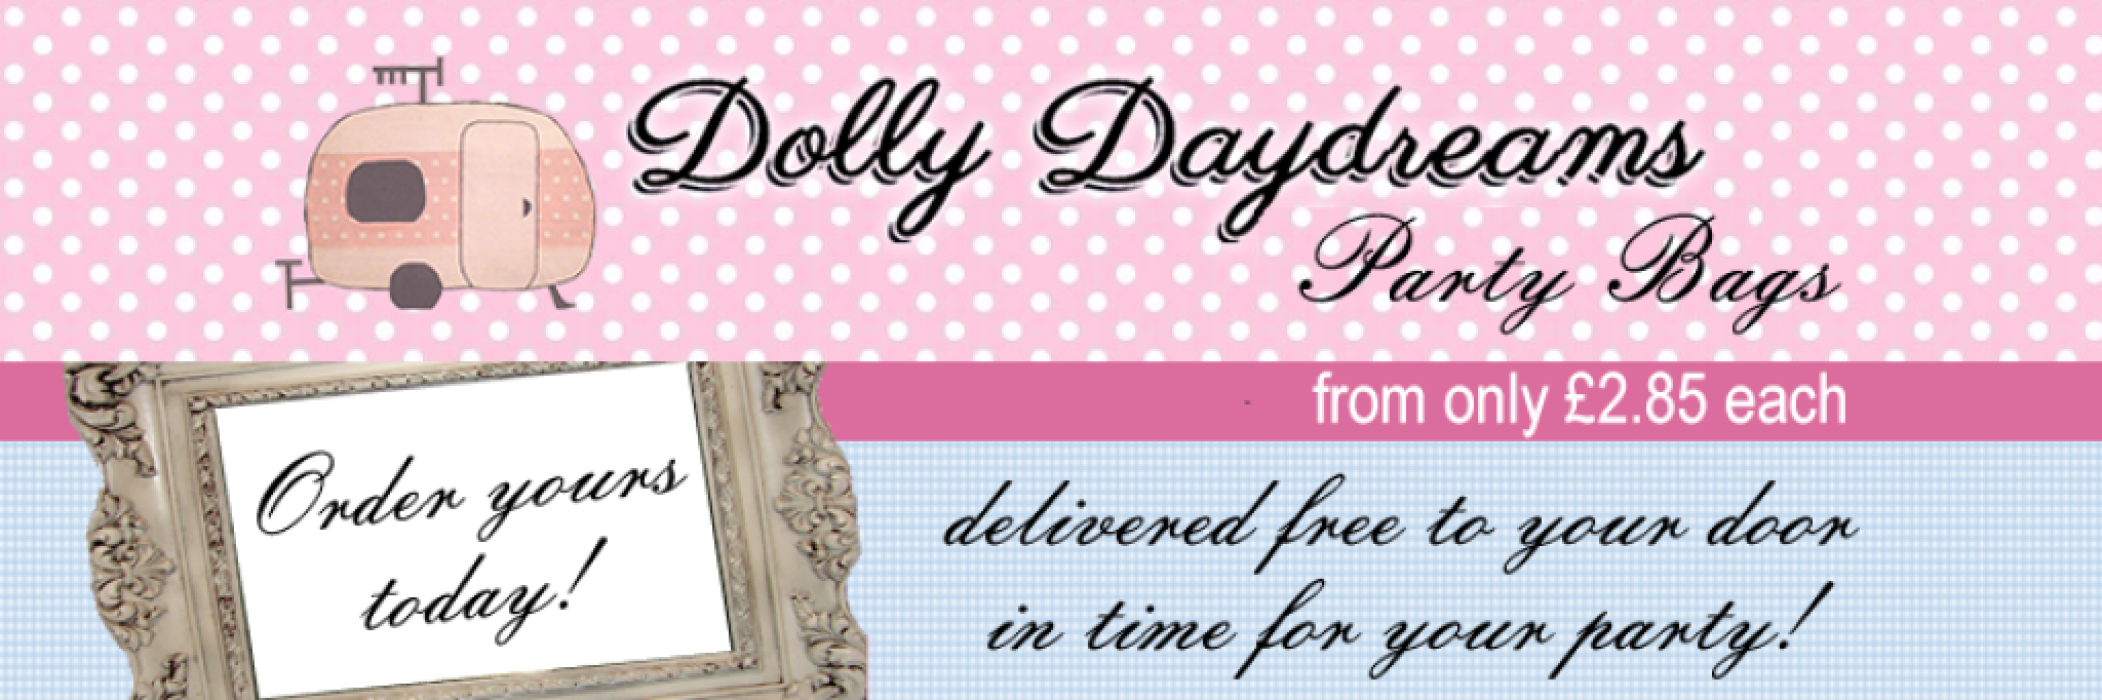 Dolly Daydreams Party Bags